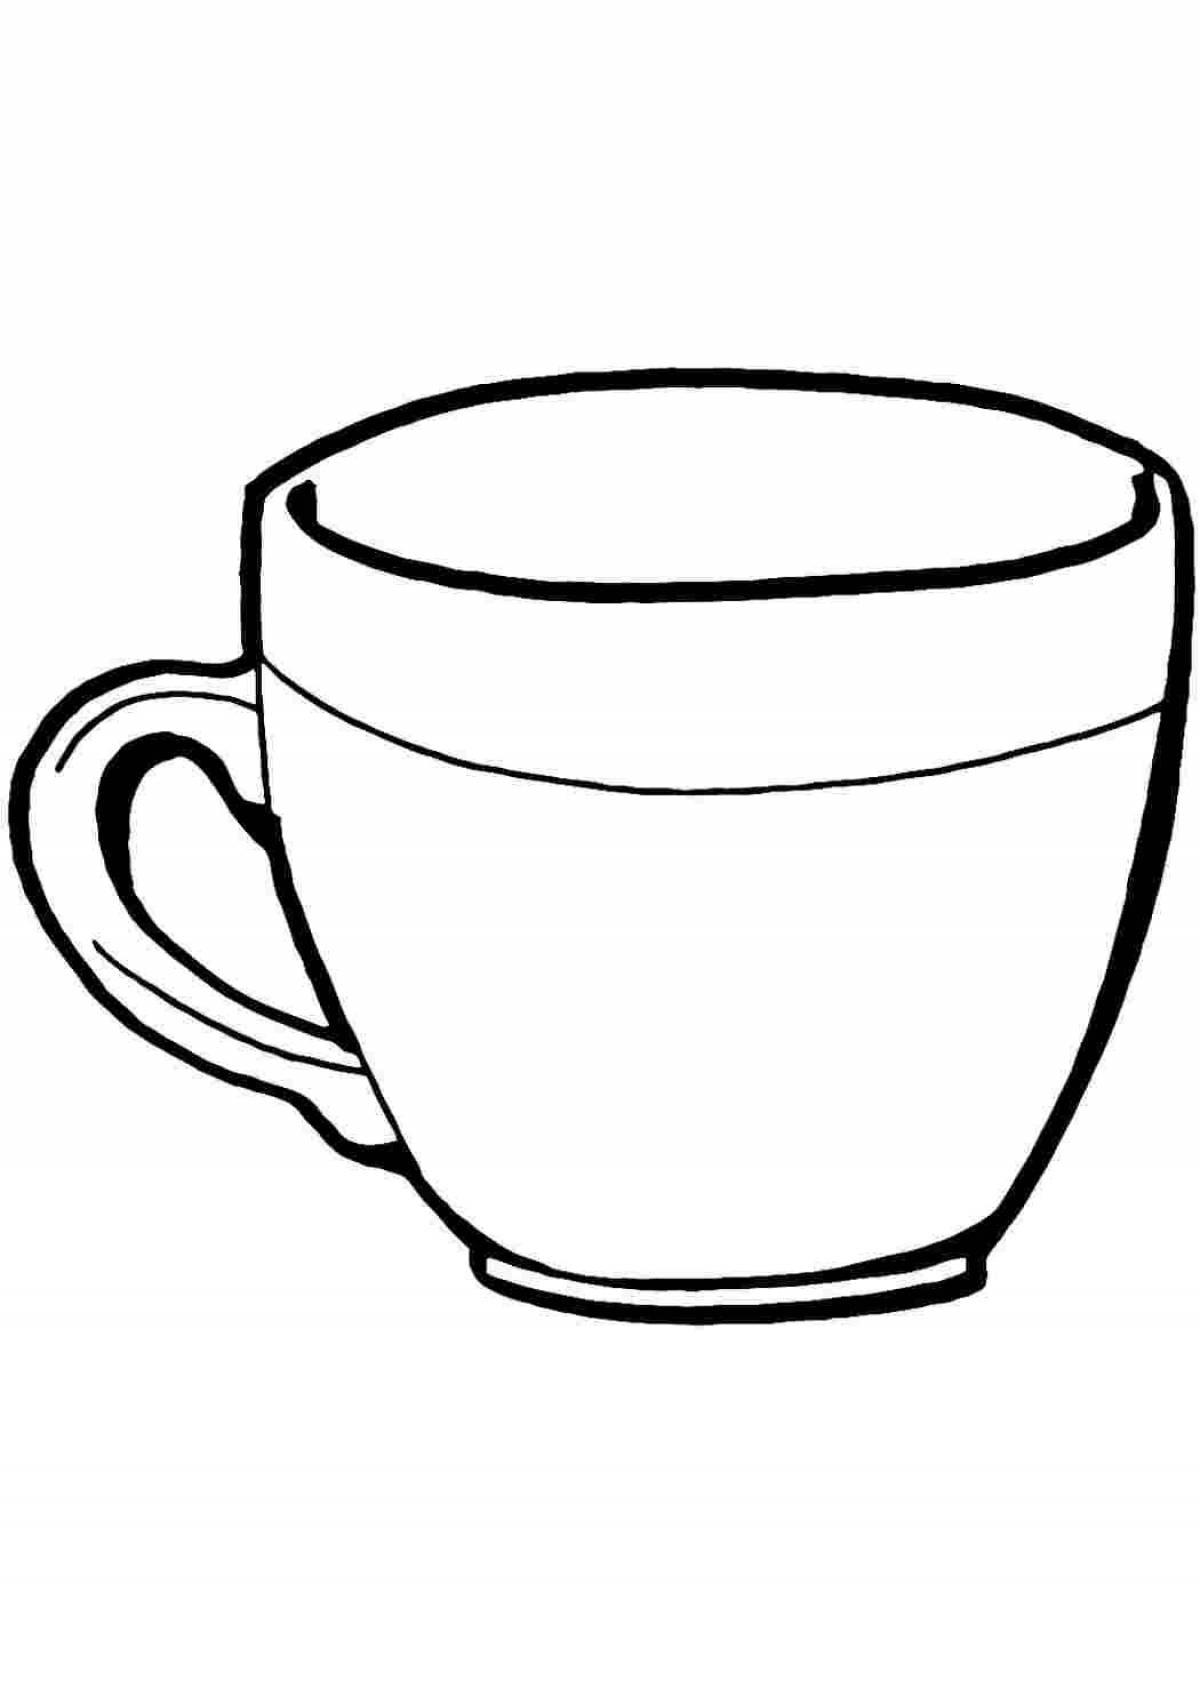 Nice cup coloring book for kids